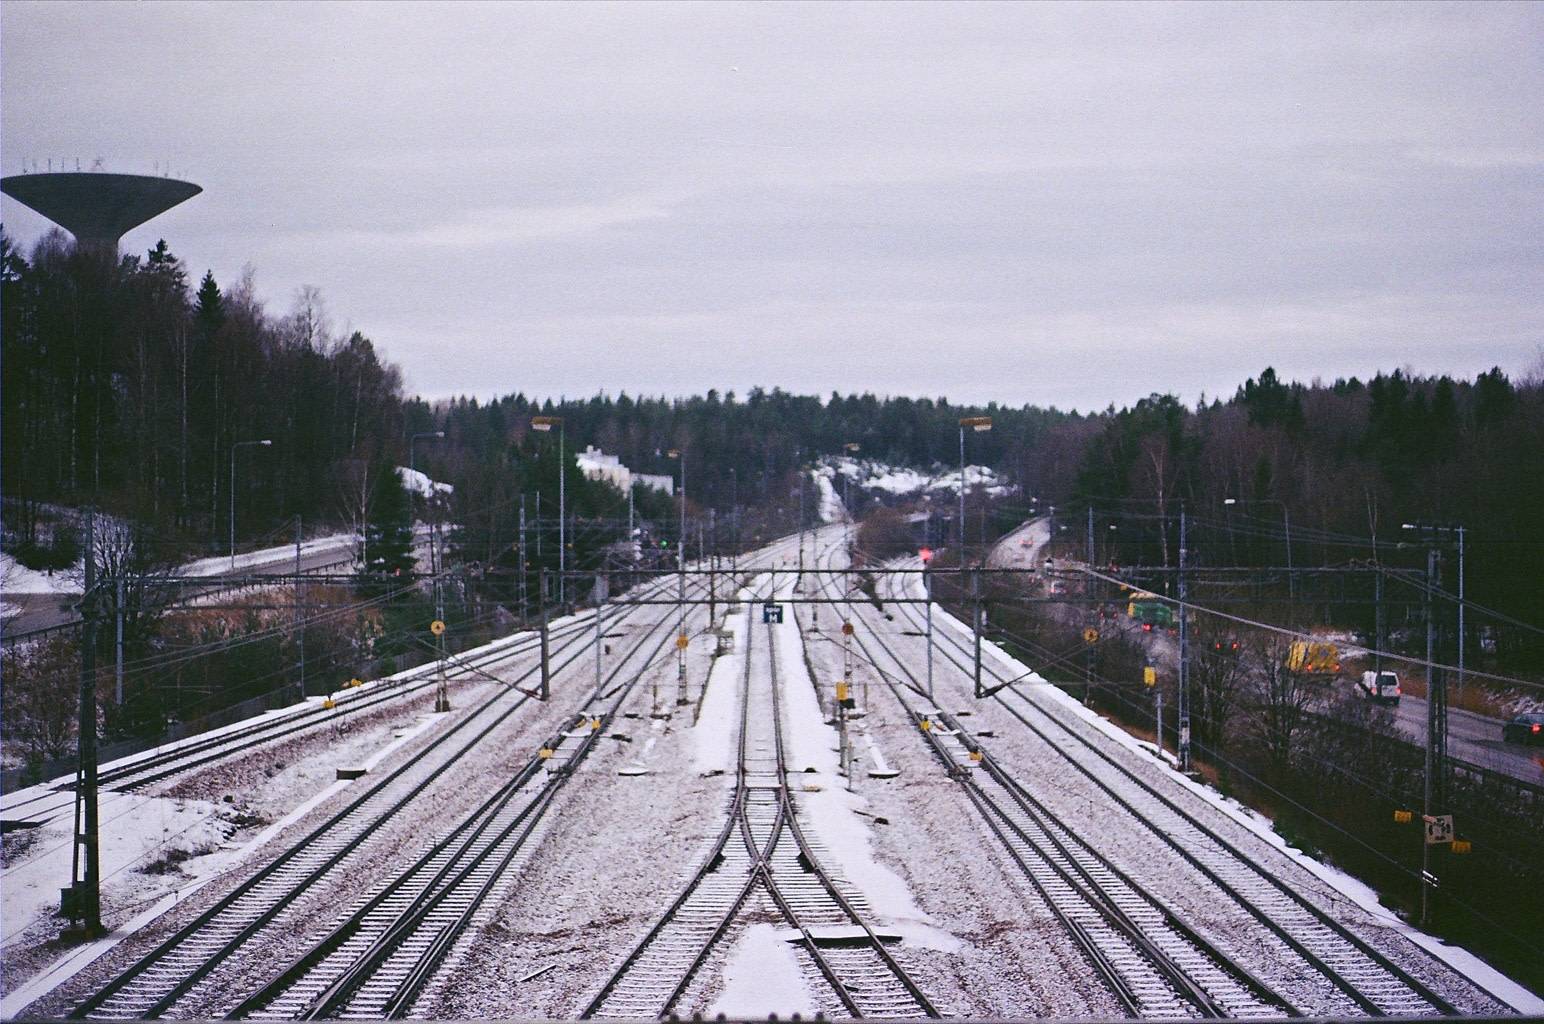 snow covered train tracks seen from above converging into horizon